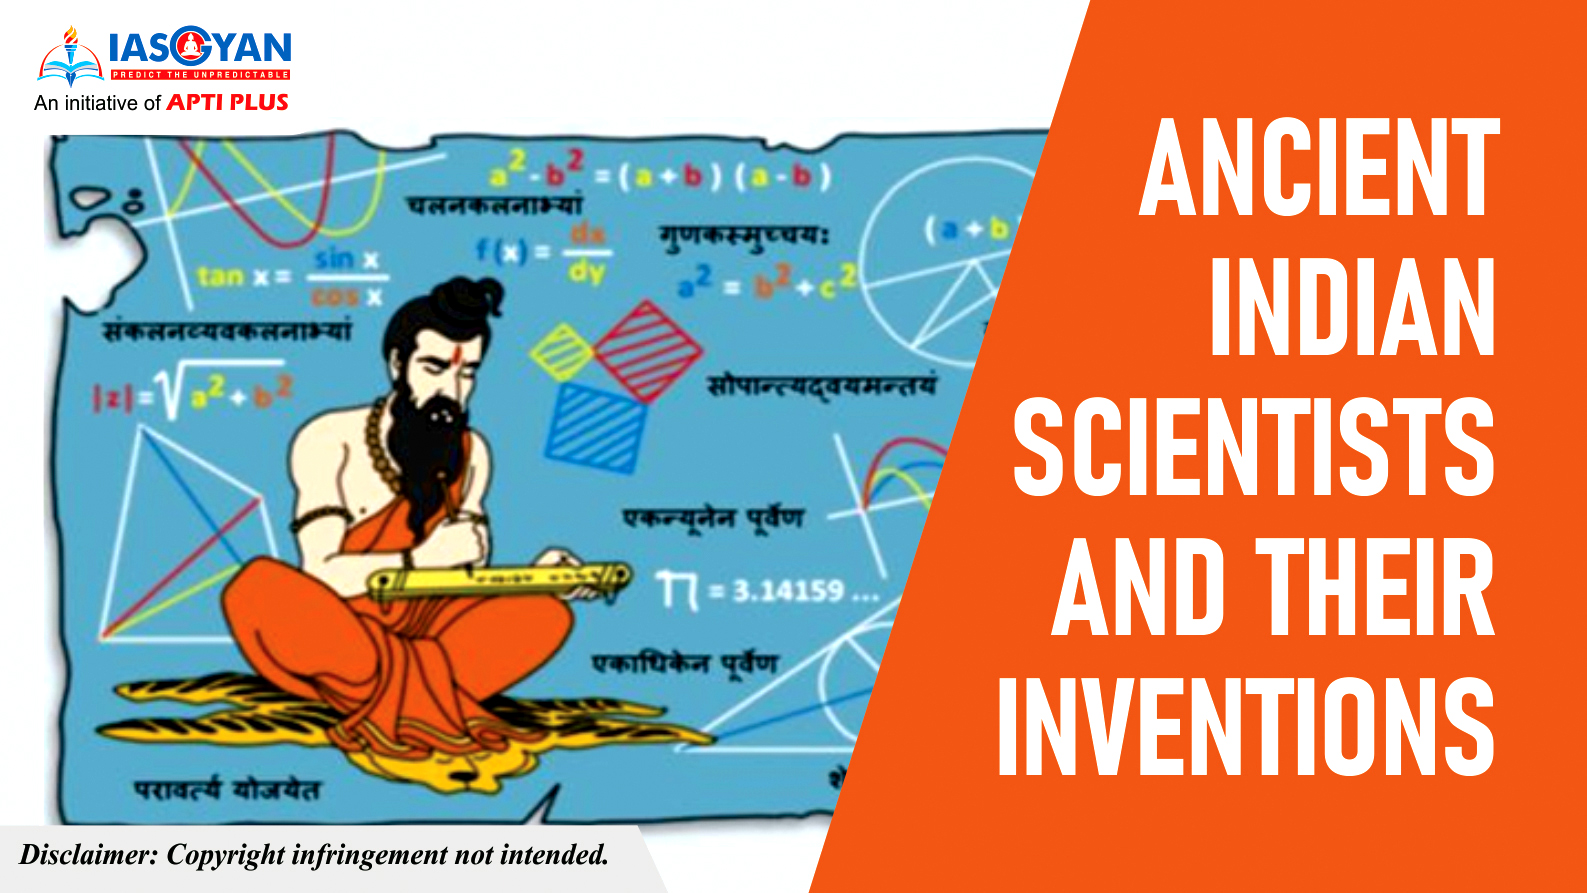 ANCIENT INDIAN SCIENTISTS AND THEIR INVENTIONS